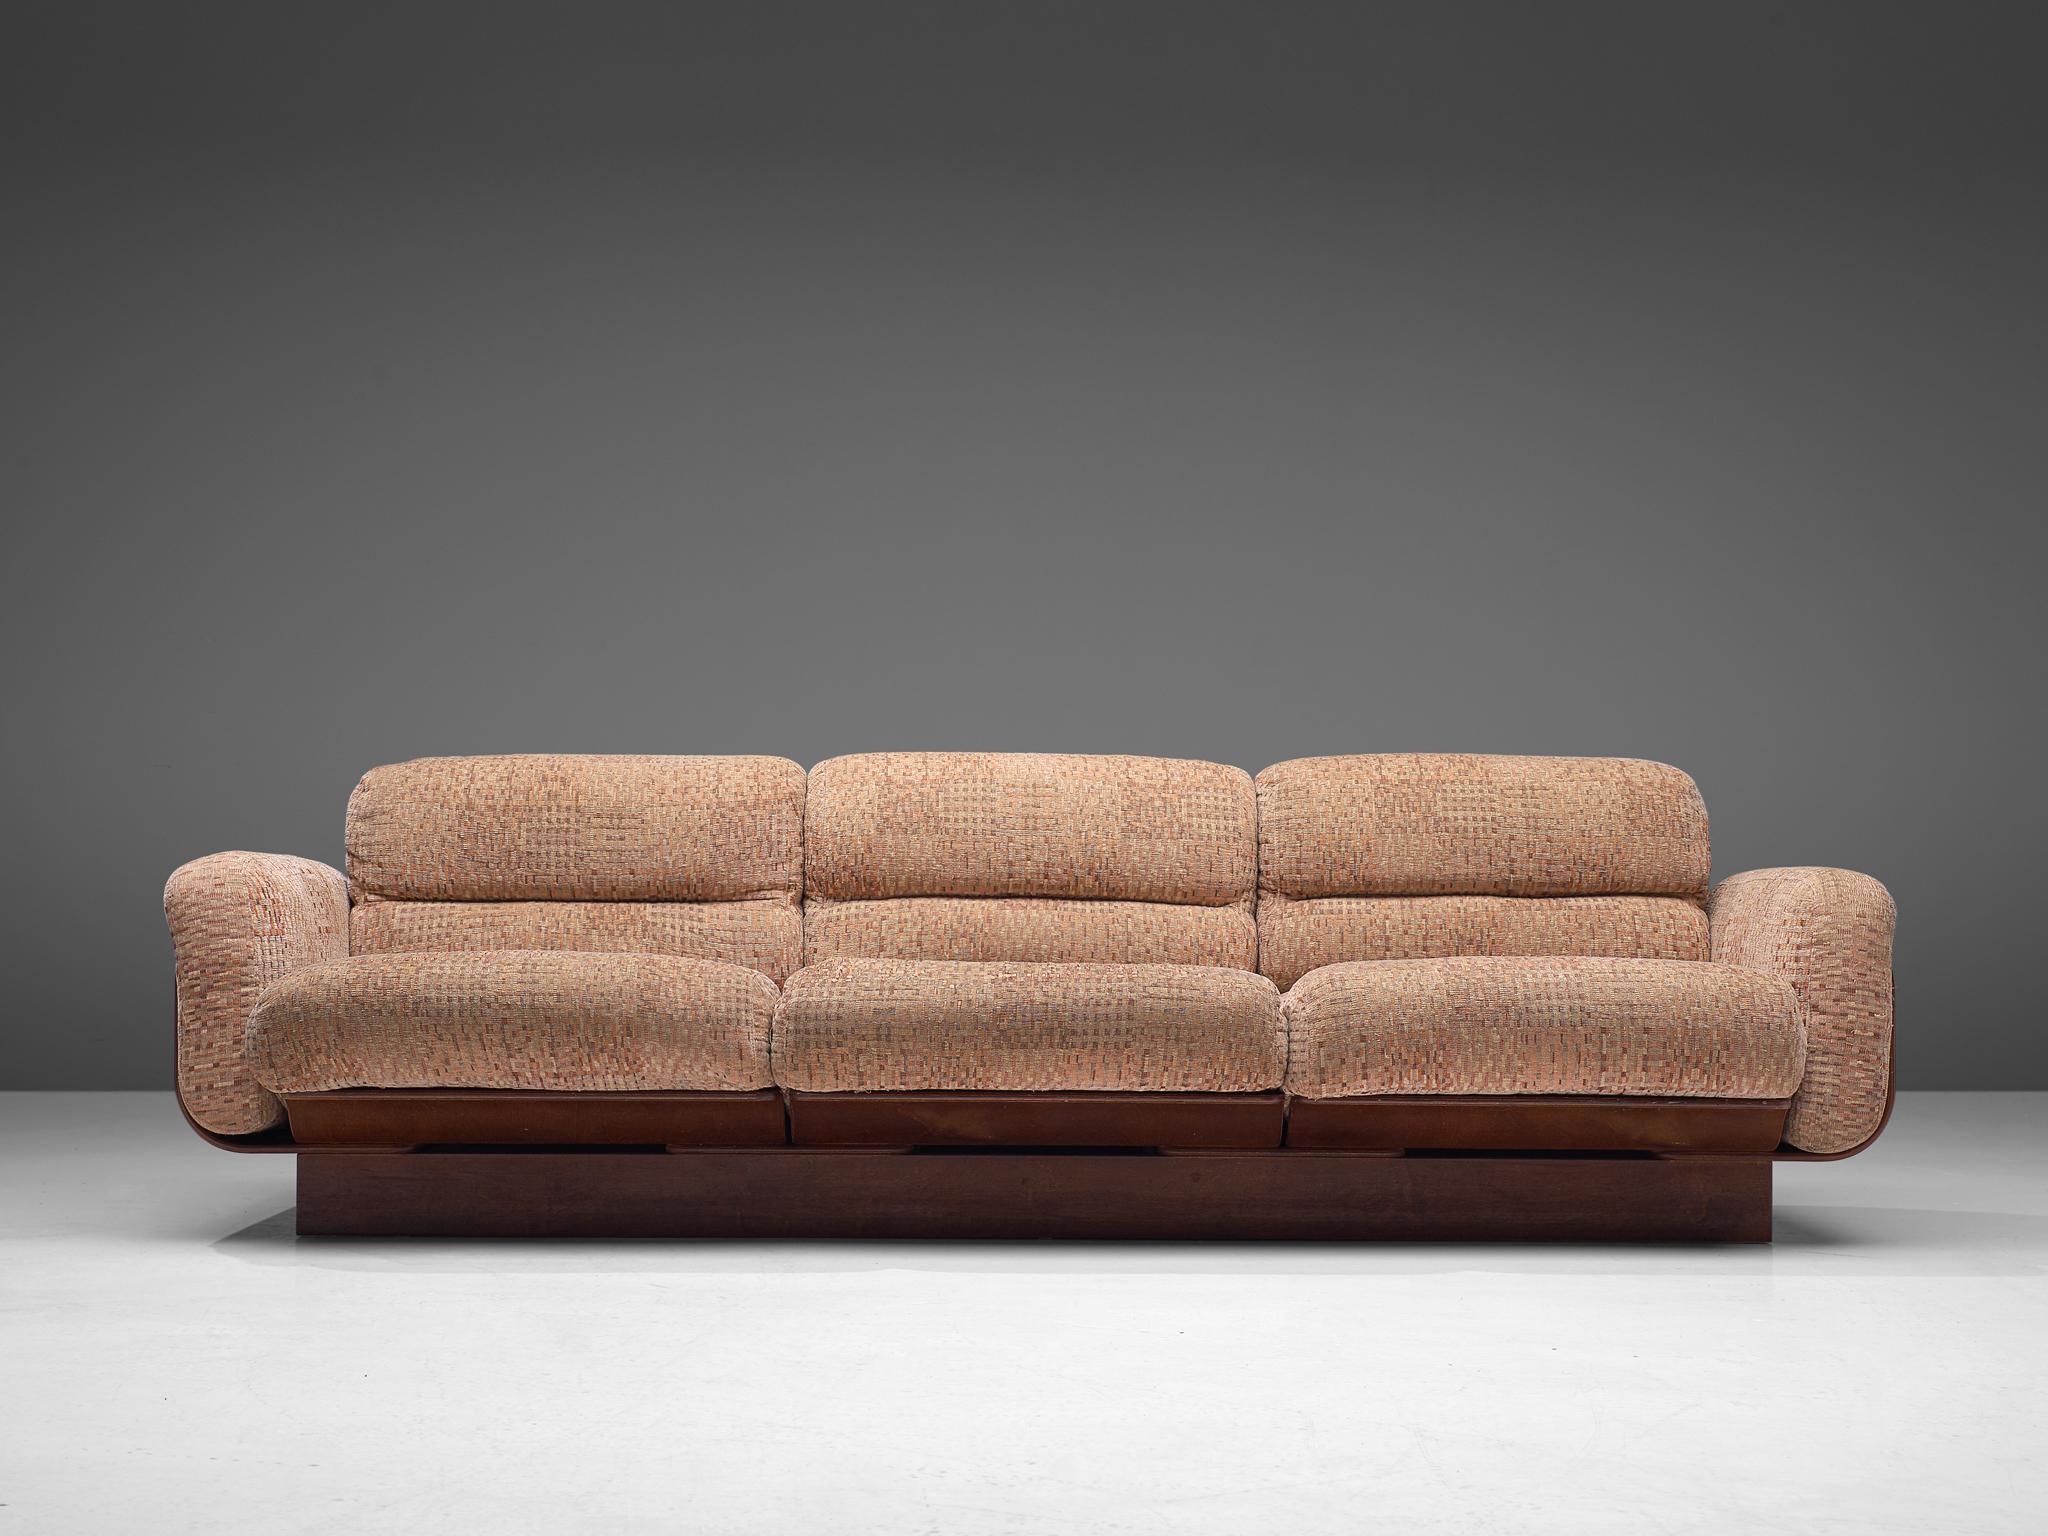 Asko, three-seat sofa, birch, fabric upholstery, Finland, 1960s

Bulky three-seat basket sofa in birch. Its frame functions as a shell that keeps the cushions in their position. The solid birch frame gives the appearance of a seat that flows. The